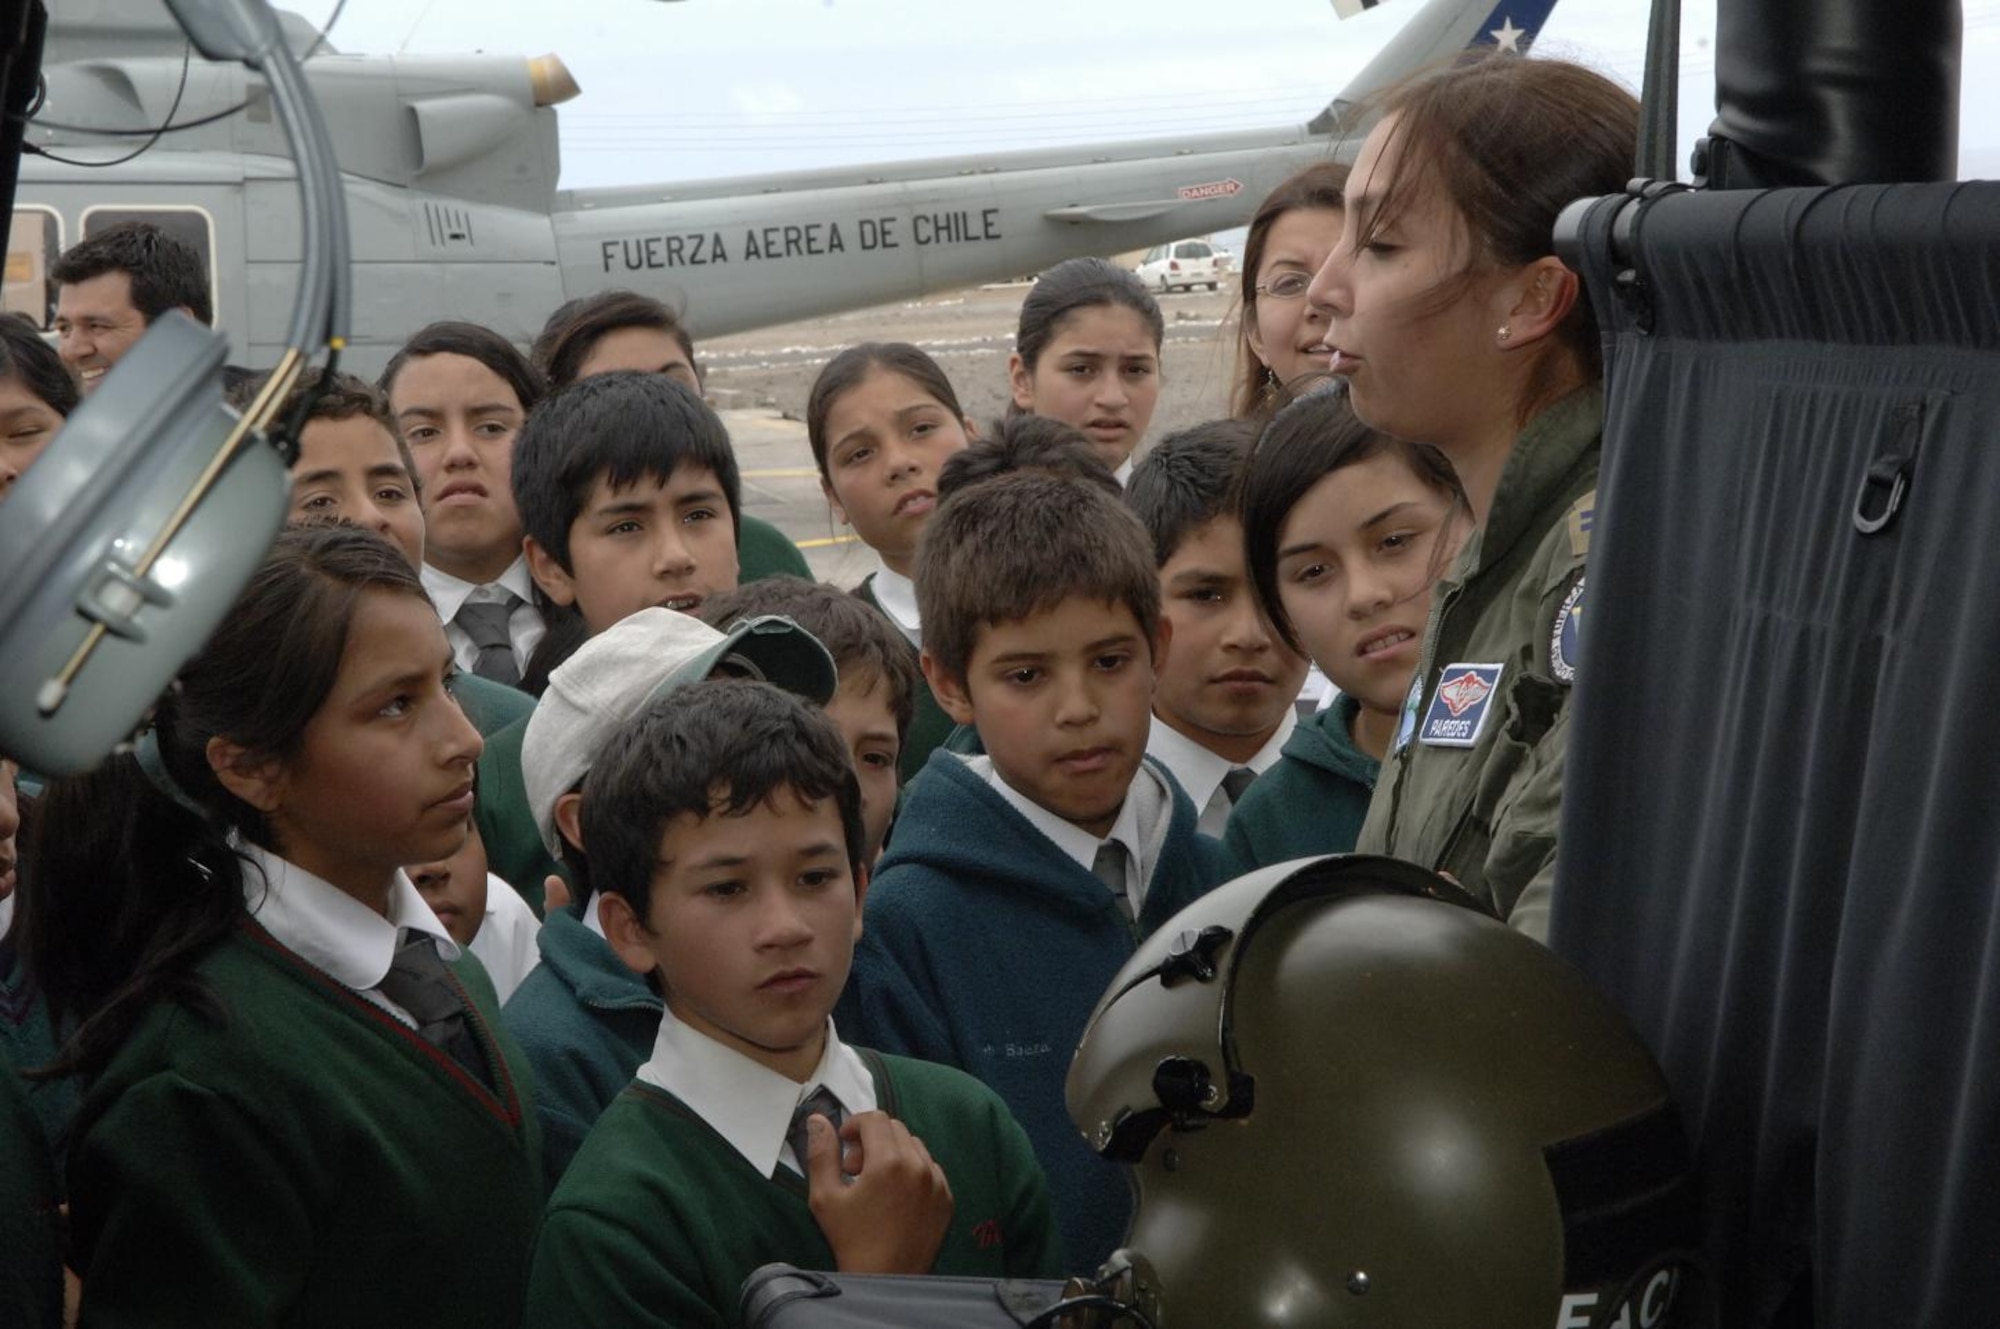 IQUIQUE, Chile -- 1st Lt. Pamela Paredes, Fuerza Aerea De Chile Bell 412 and UH-1H helicopter pilot, explains the Bell 412 to students of Colegio Macaya during a base tour here Oct. 30. Students were invited to the base to see U.S. and Chilean Air Force aircraft, and meet Airmen. (U.S. Air Force photo by Tech. Sgt. Eric Petosky)